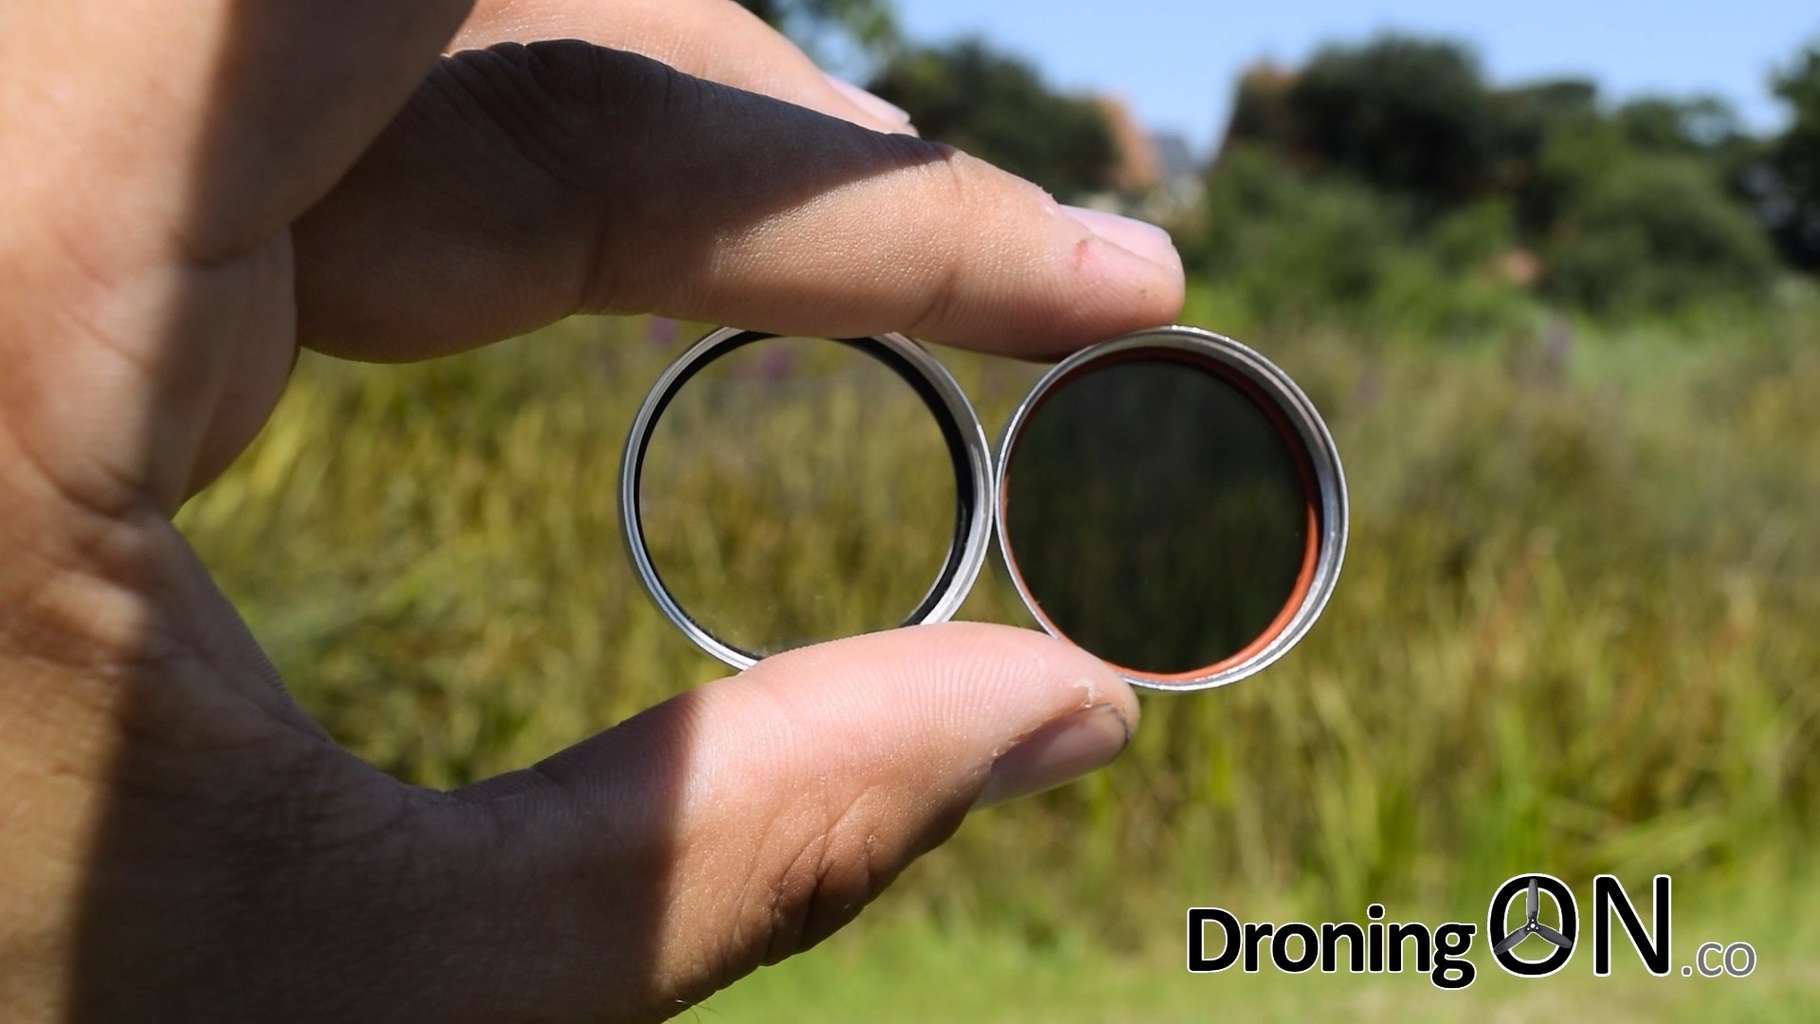 DroningON Guide to ND Filters (Neutral Density) on the DJI Phantom